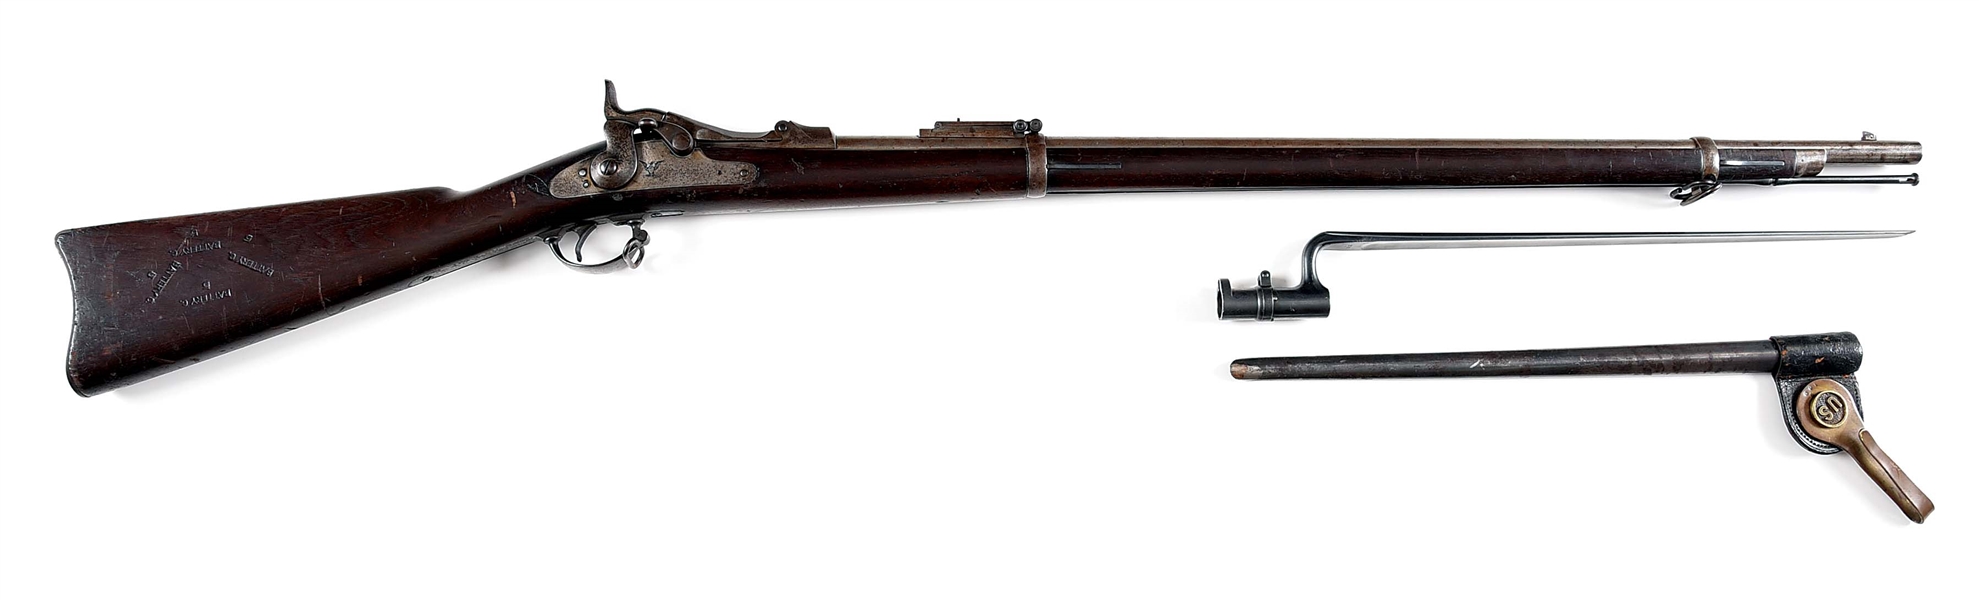 (A) BATTERY C. UNIT MARKED US SPRINGFIELD MODEL 1884 TRAPDOOR RIFLE WITH BAYONET.